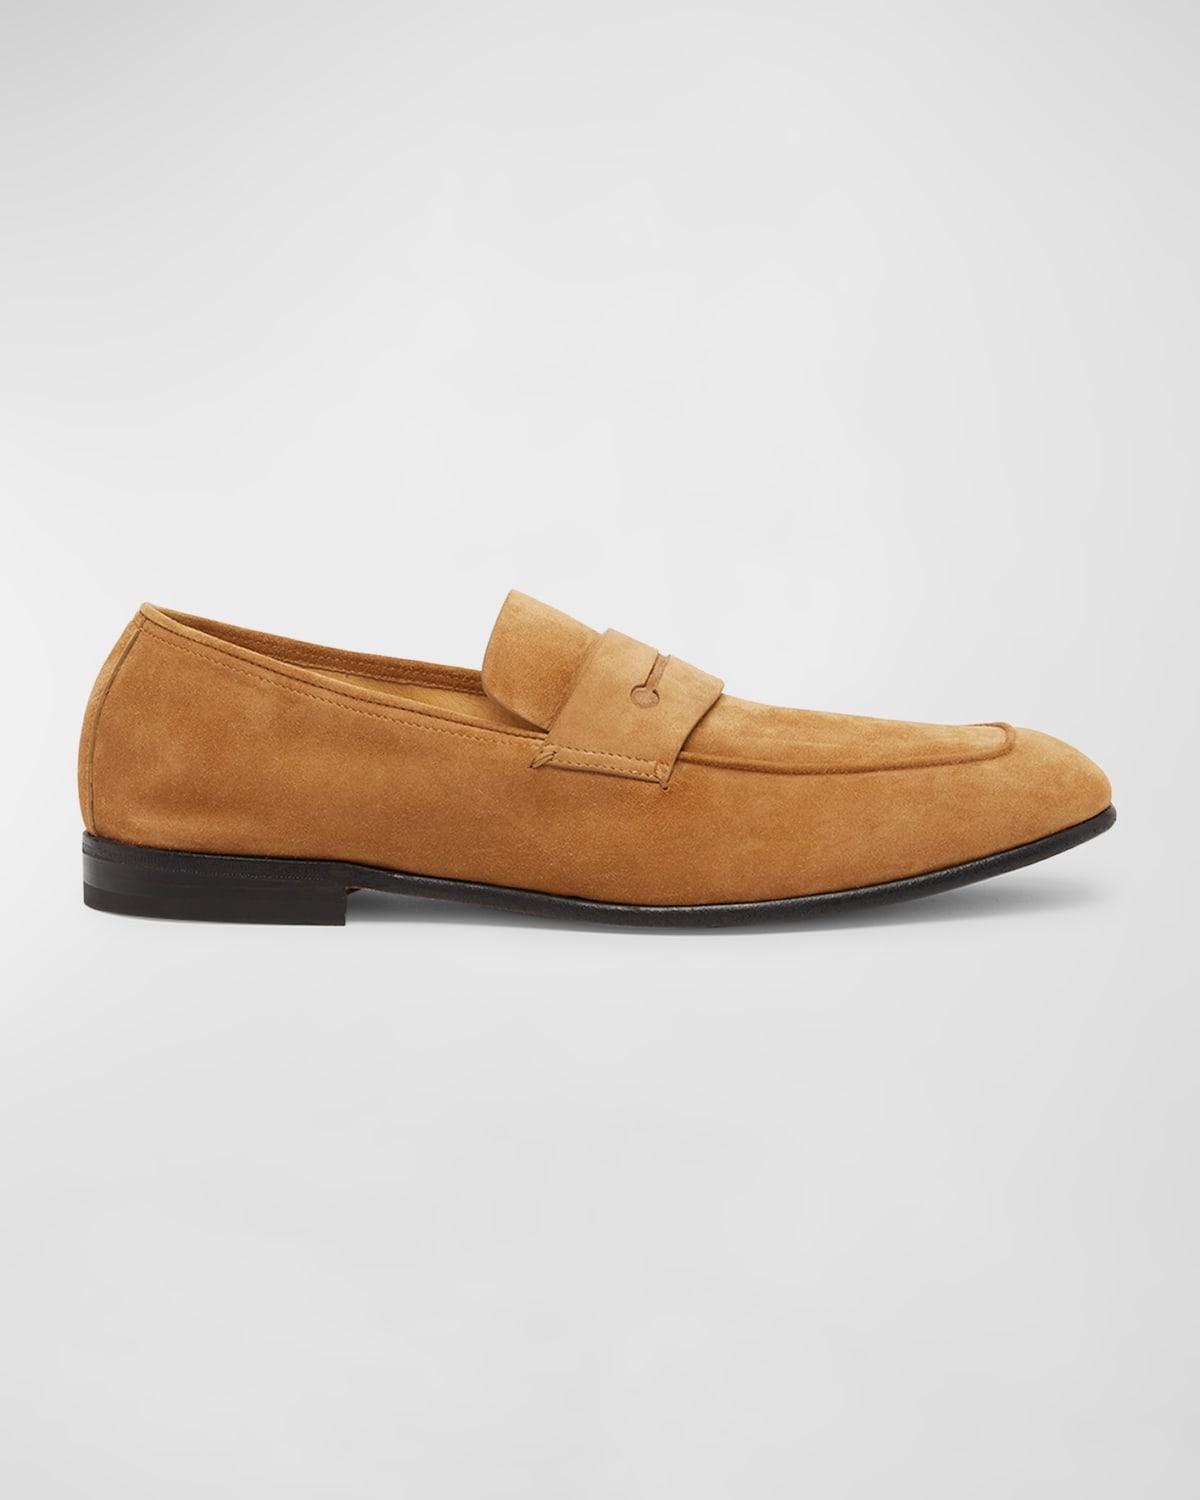 Mens Suede Penny Loafers Product Image